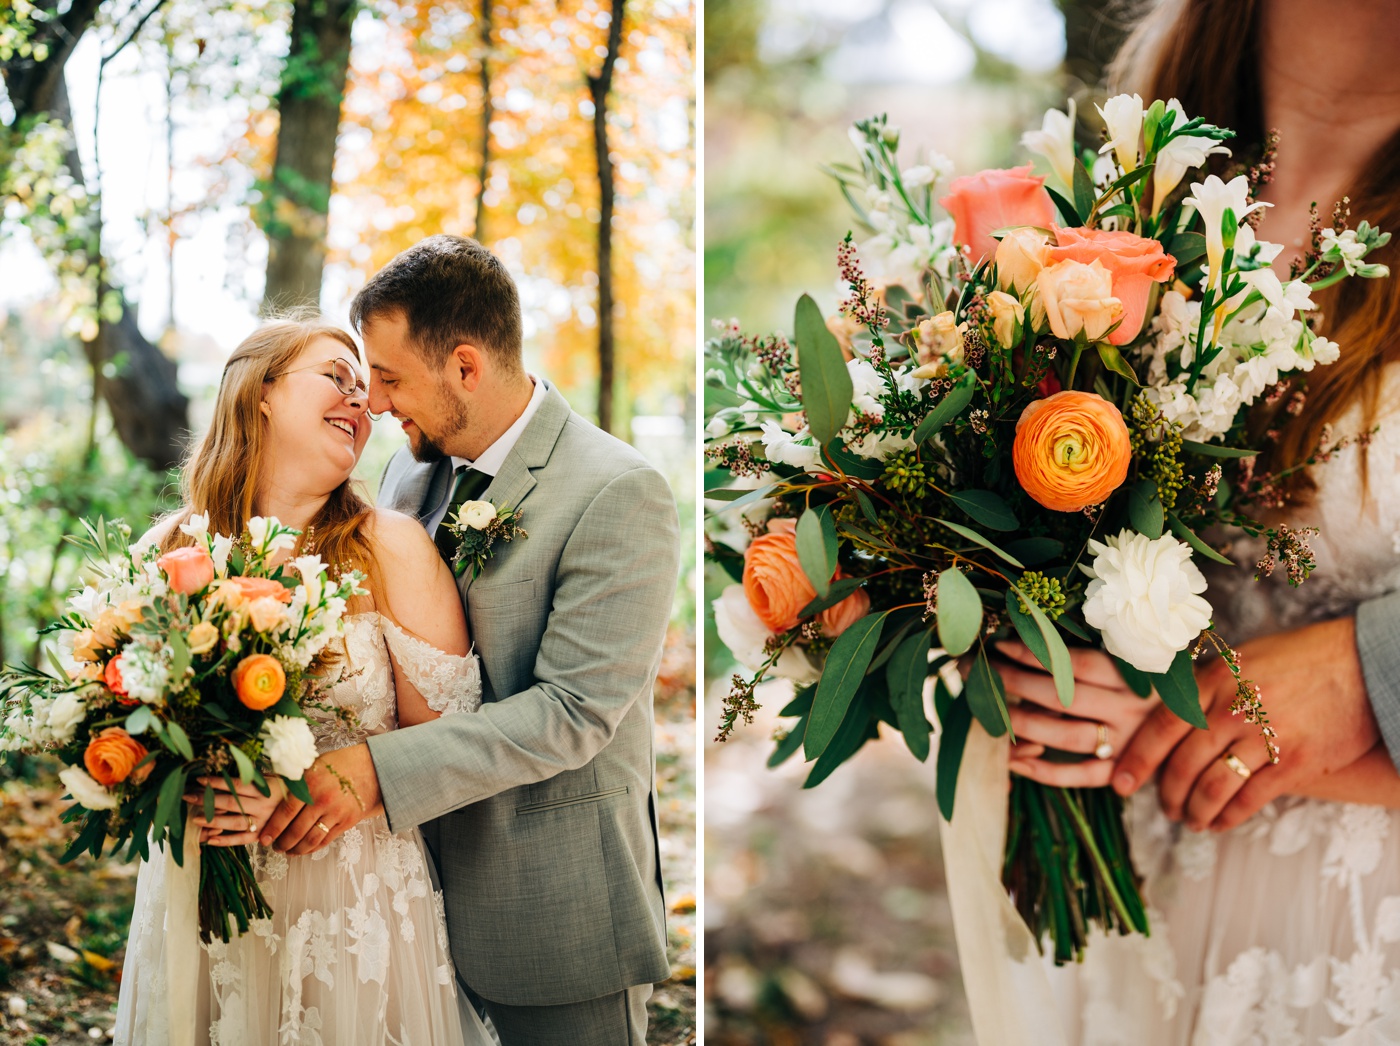 Bridal bouquet filled with pink roses, orange ranunculus, and succulents